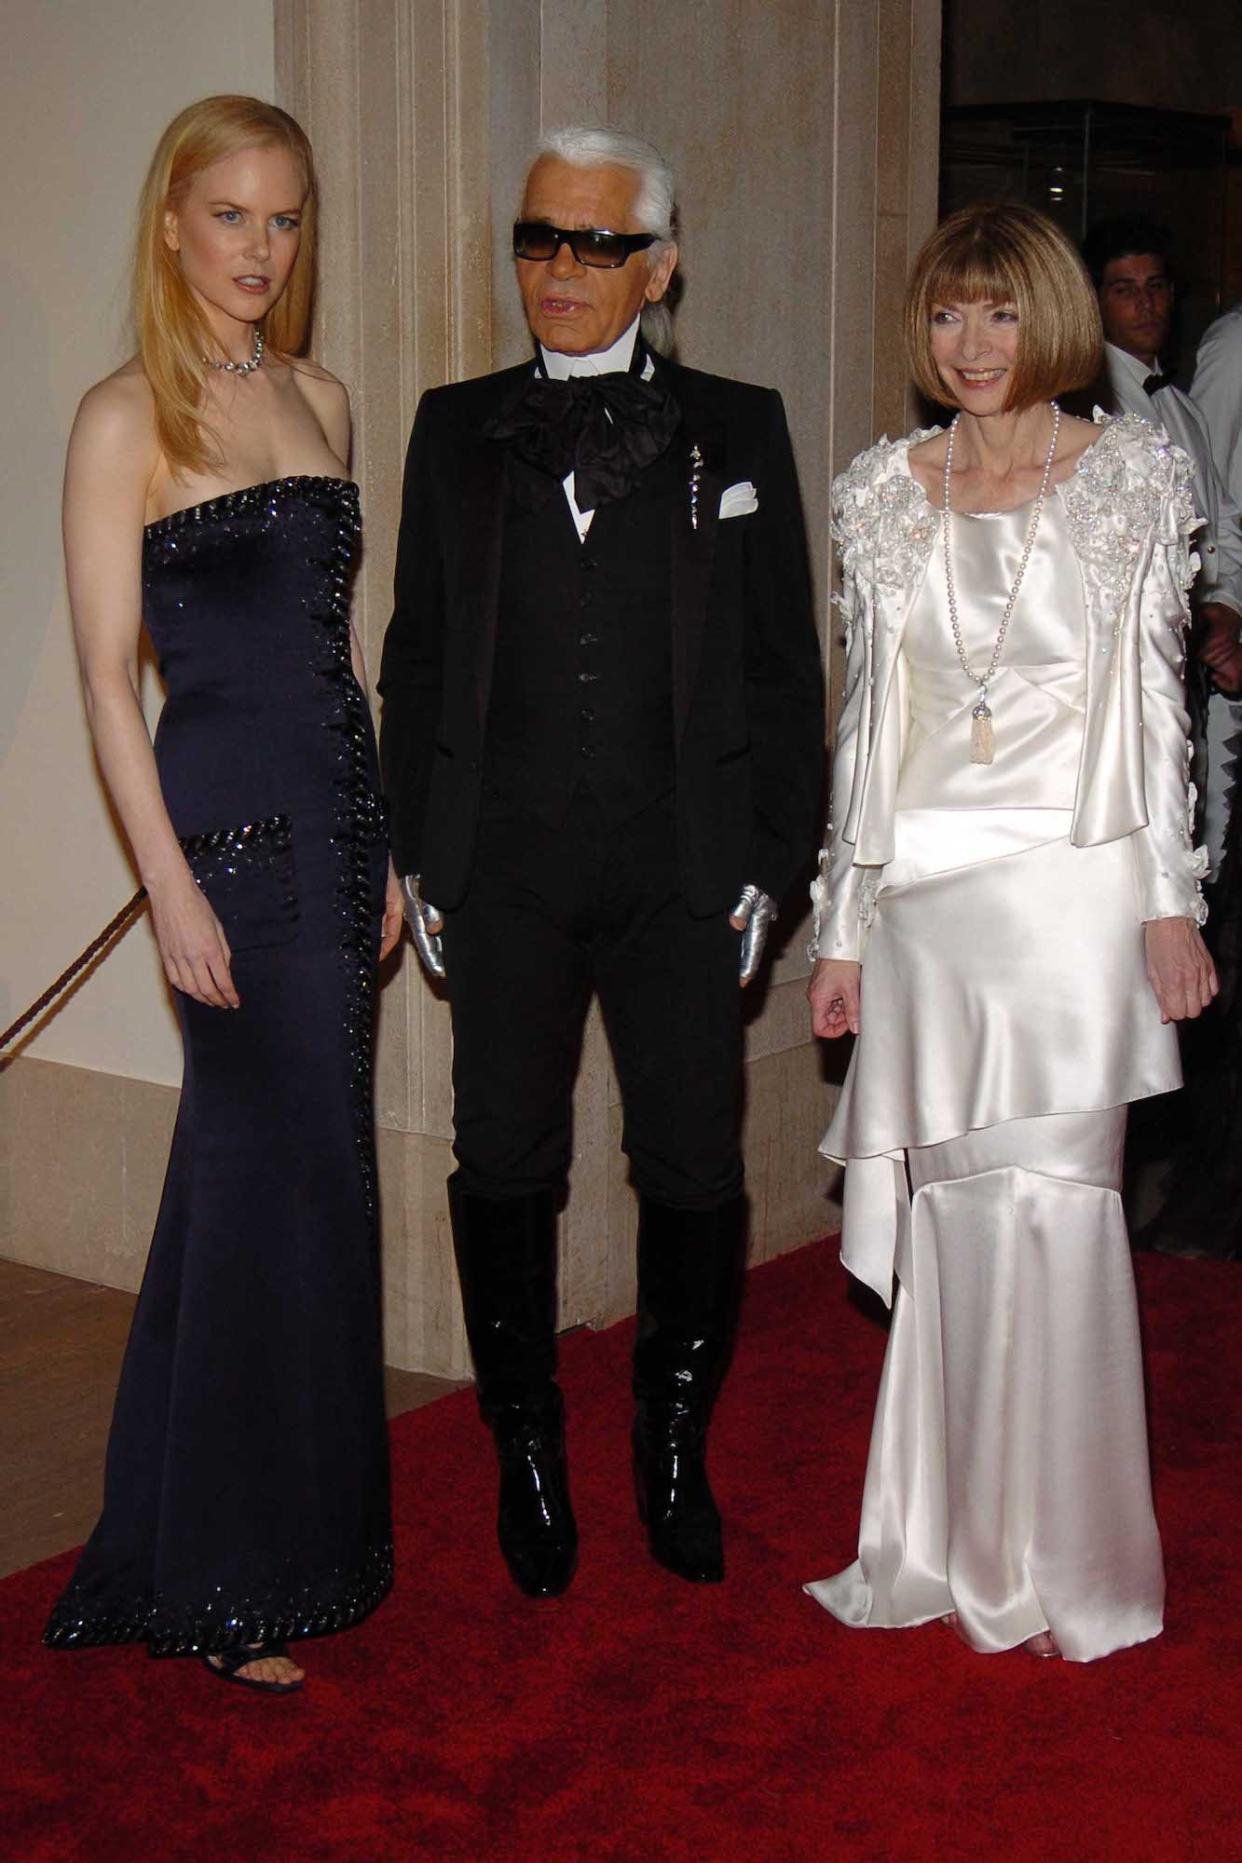 Nicole Kidman, Karl Lagerfeld, and Anna Wintour stand together at the 2005 Met Gala. Kidman is wearing a navy strapless dress, Lagerfeld a black suit with shiny knee-high boots, and Wintour a white silk dress and jacket.